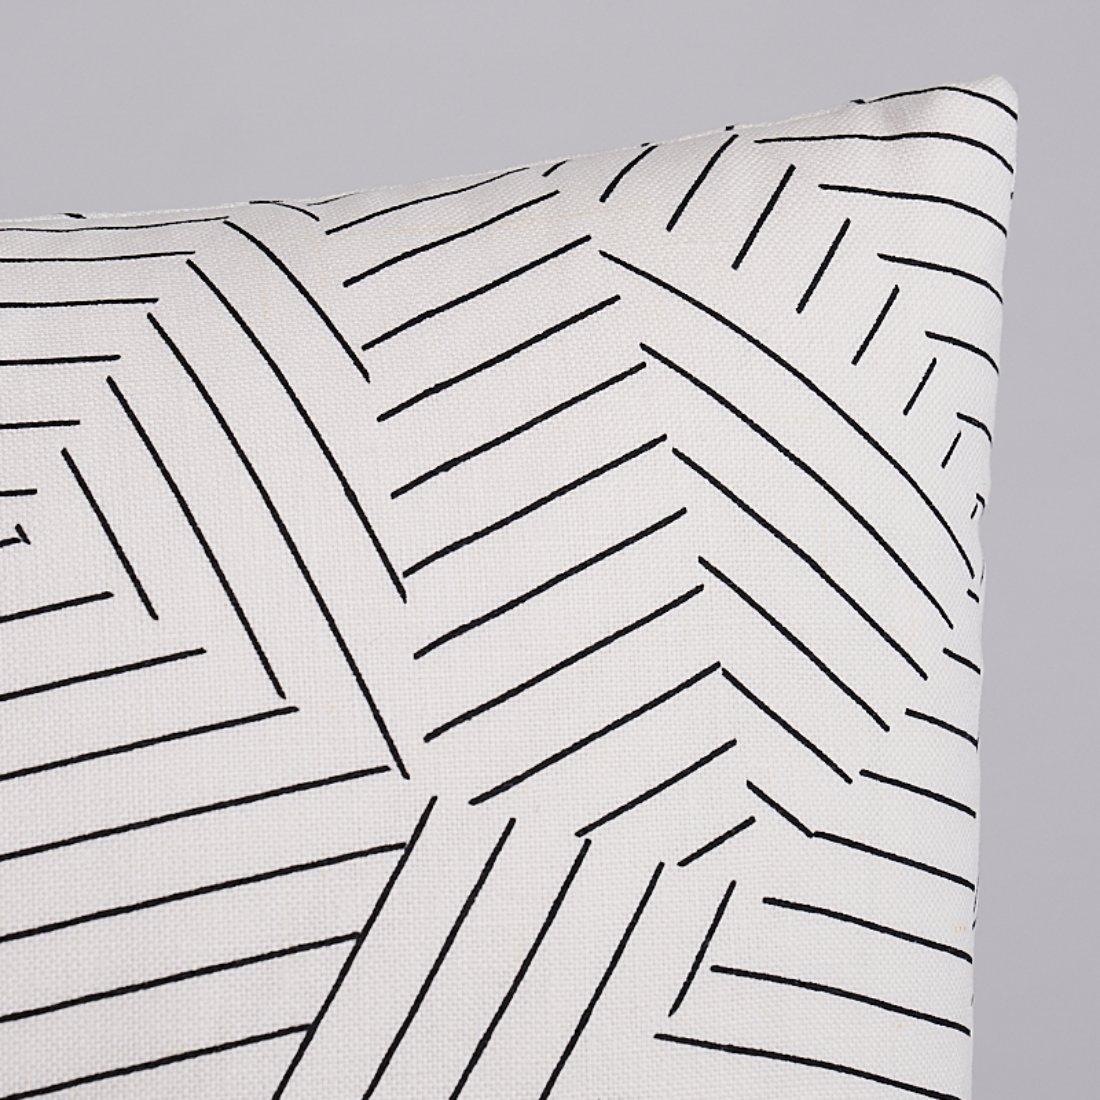 This pillow features Deconstructed Stripe by Miles Redd for Schumacher with a Self-Welt finish. This graphic collage of stripes is an homage to the legendary decorator Albert Hadley. Pillow includes a feather/down fill insert and hidden zipper